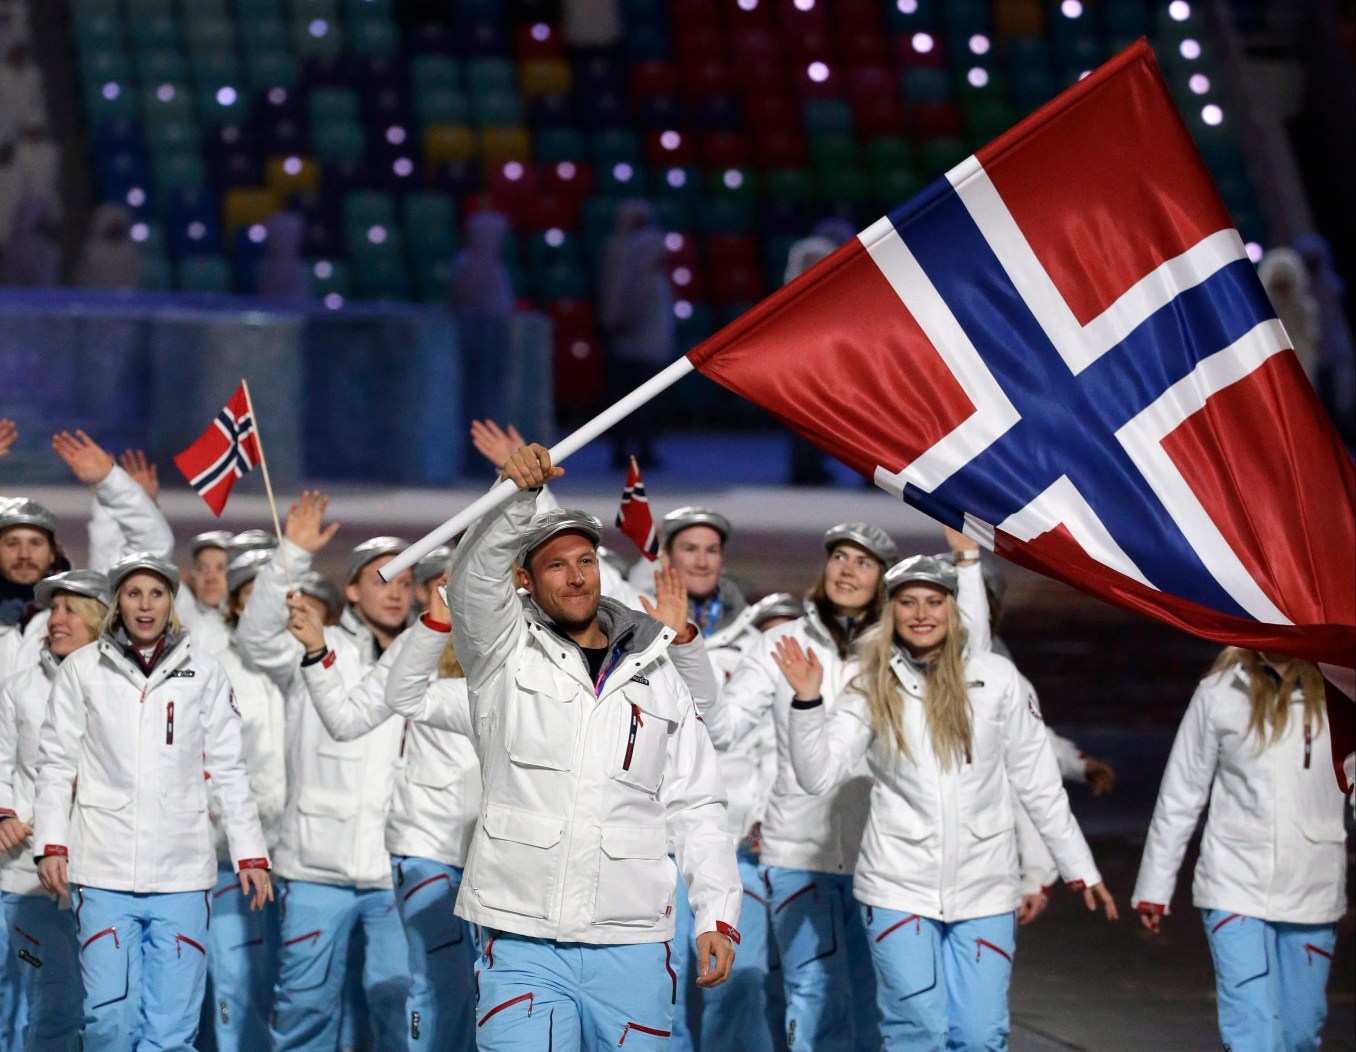 Aksel Lund Svindal of Norway carries the national flag as he leads the team during the opening ceremony of the 2014 Olympic Winter Games in Sochi, Russia, Friday, Feb. 7, 2014. (AP Photo/Mark Humphrey)